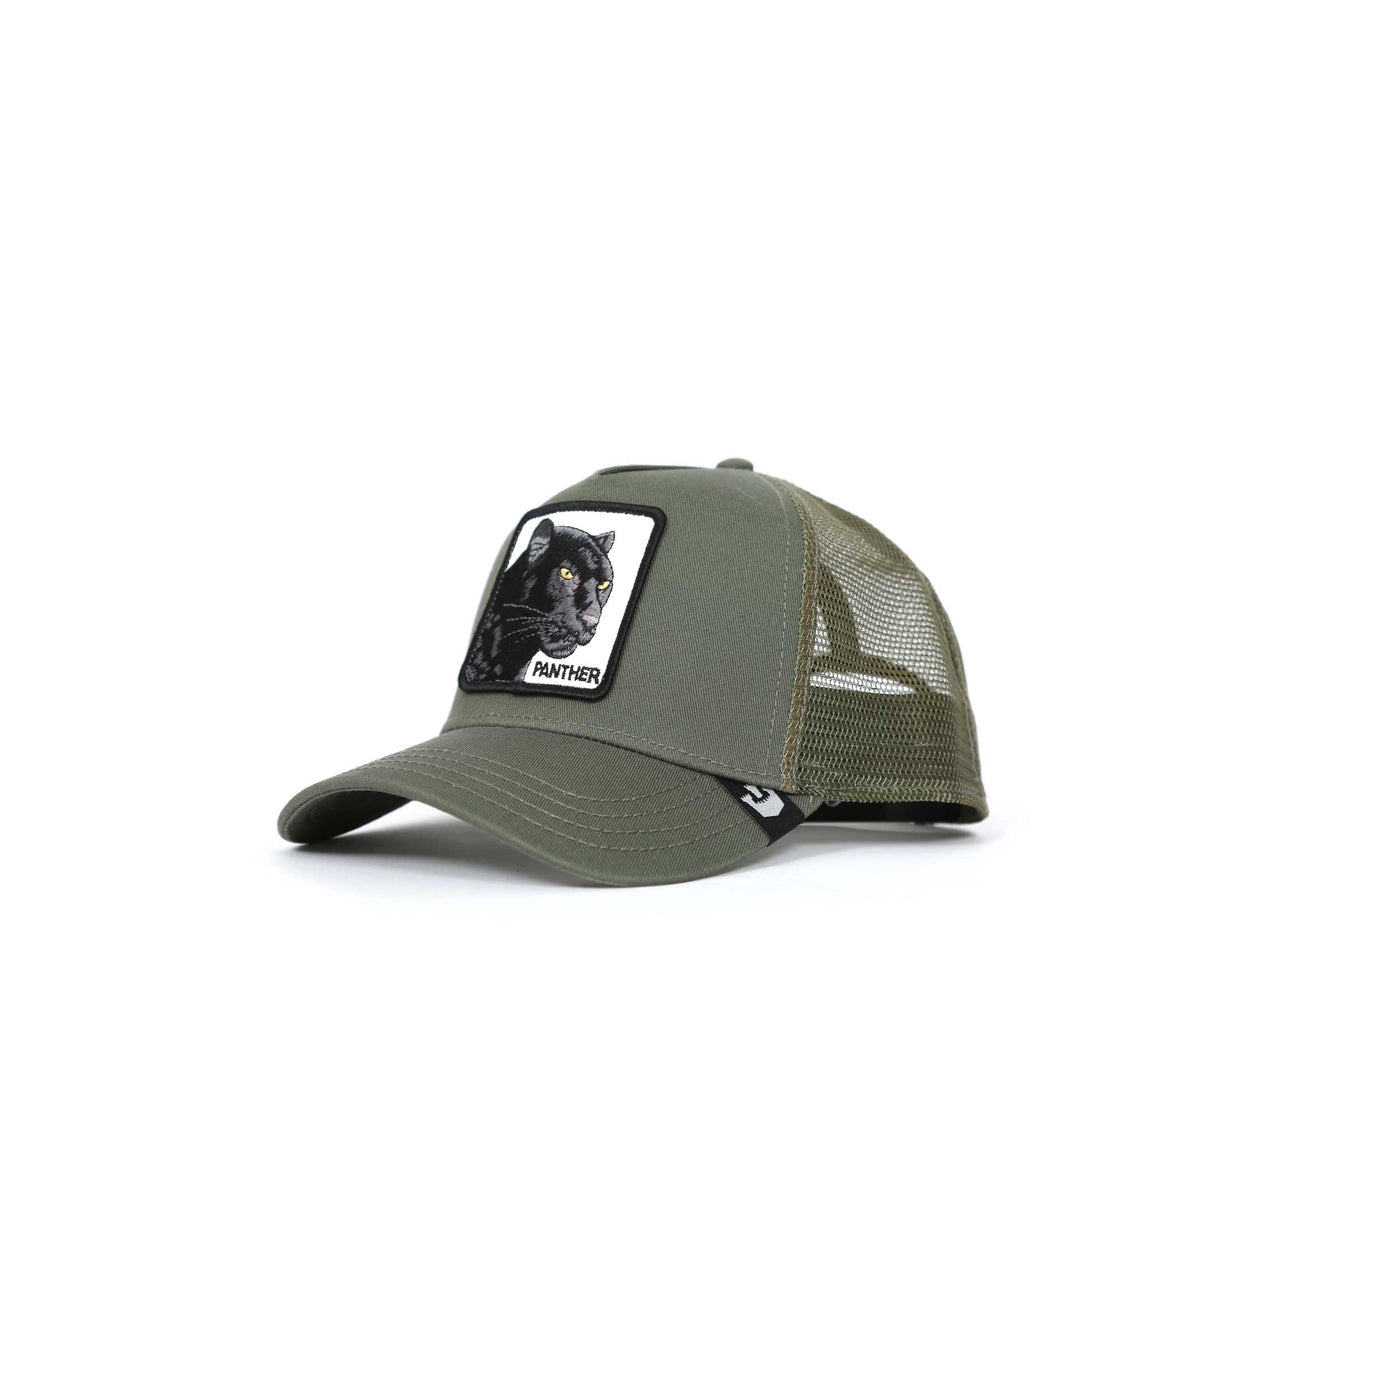 Goorin Bros The Panther Trucker Cap in Khaki Angle